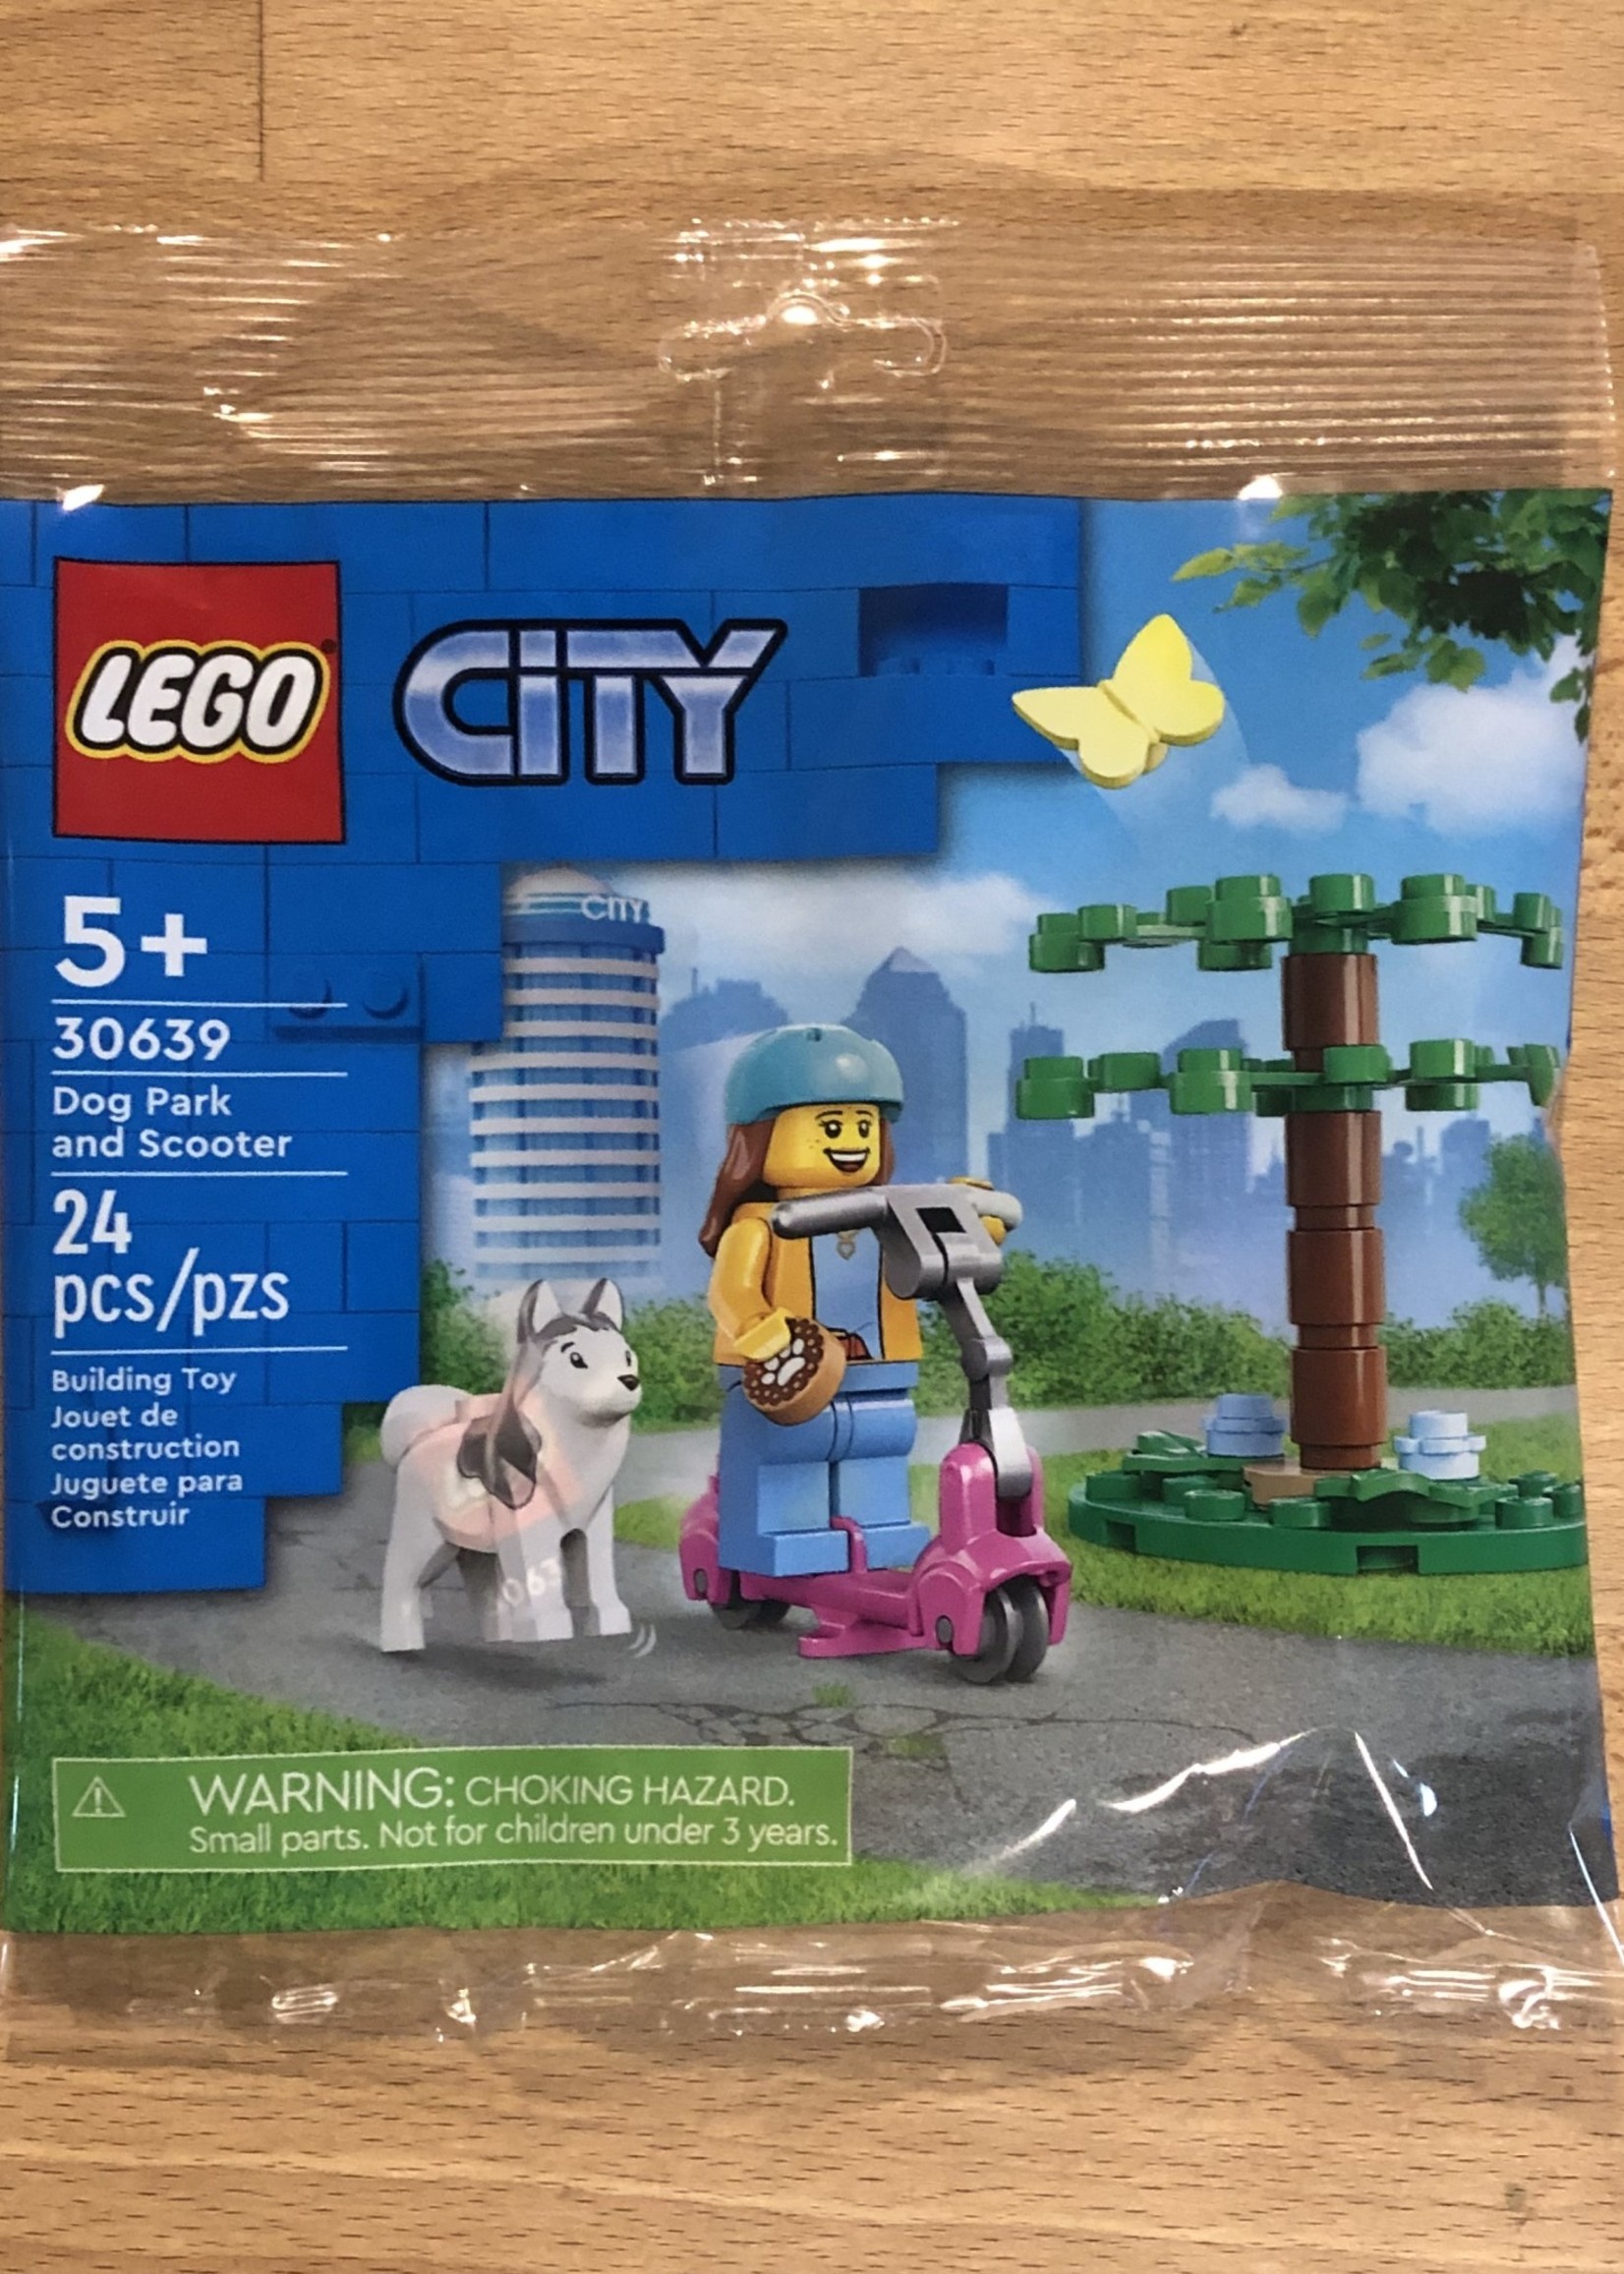 Lego City - Dog Park and Scooter